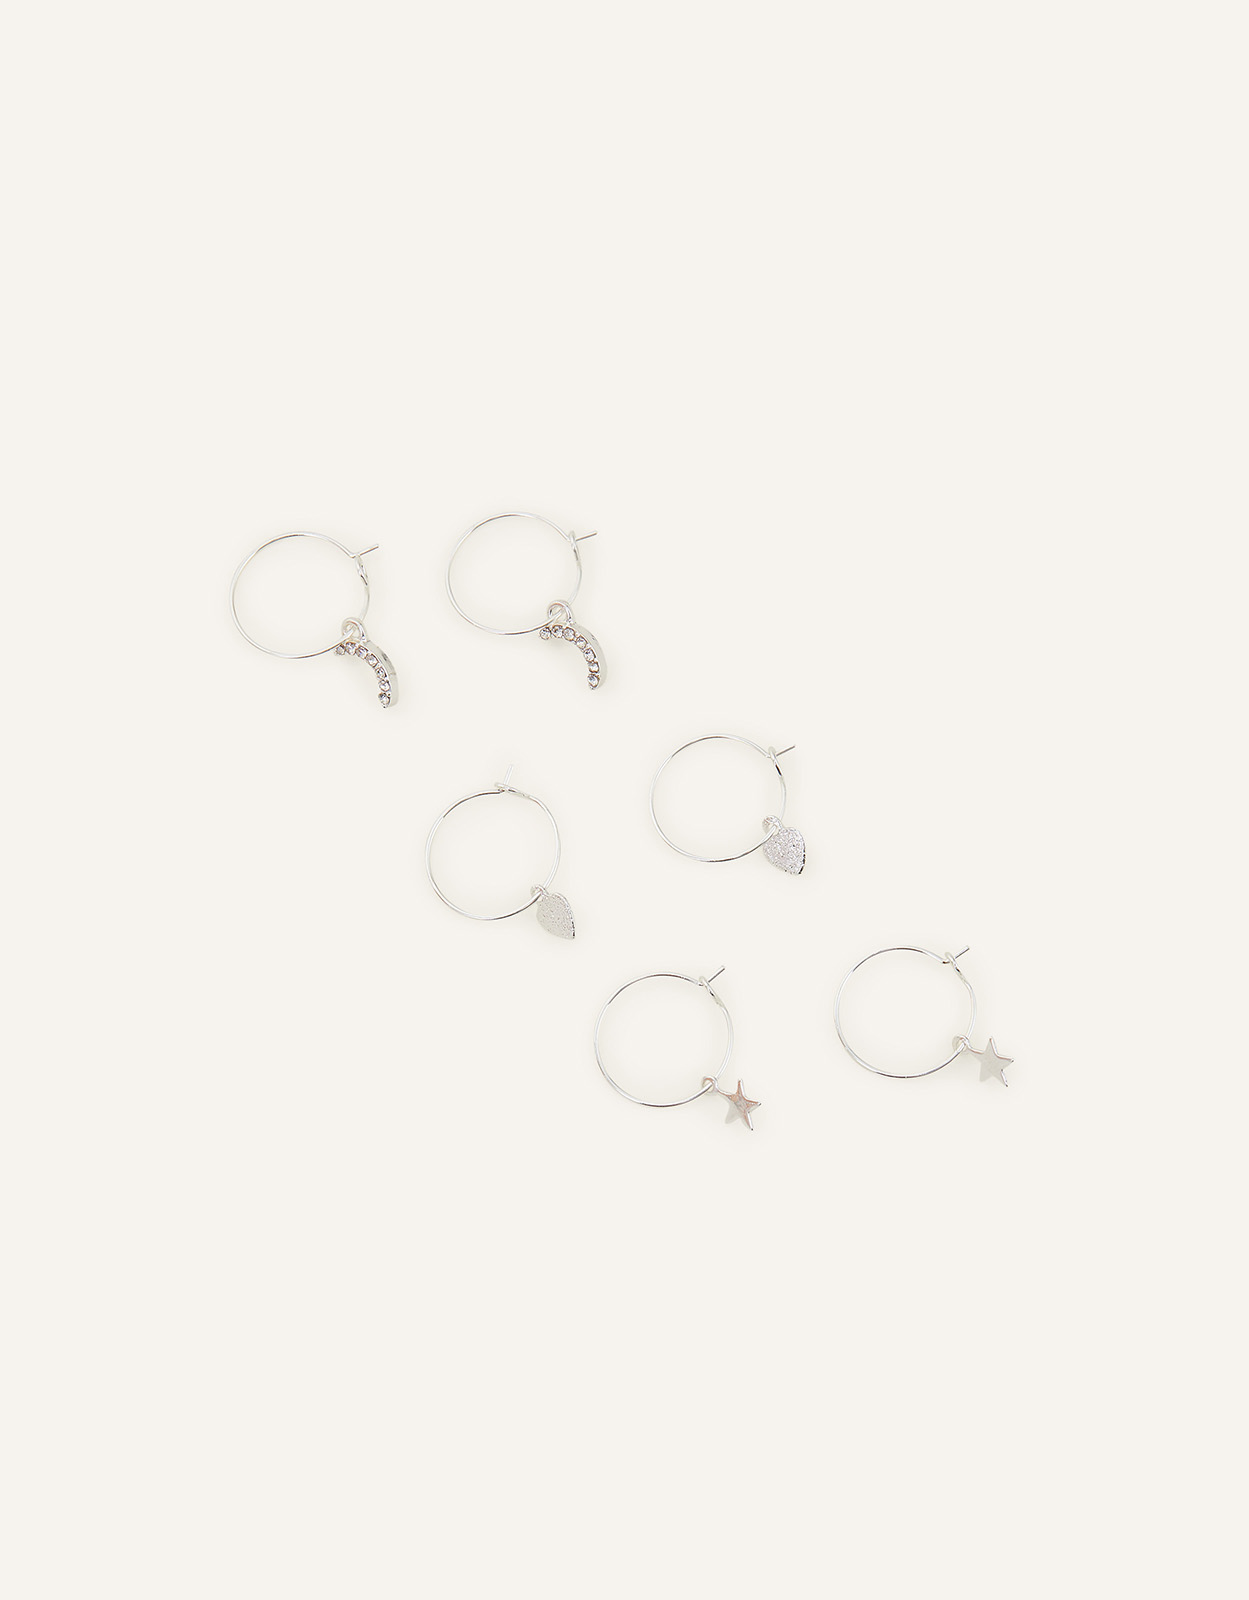 Accessorize Women's Star and Moon Hoop Earring Set of Three, Size: 2cm